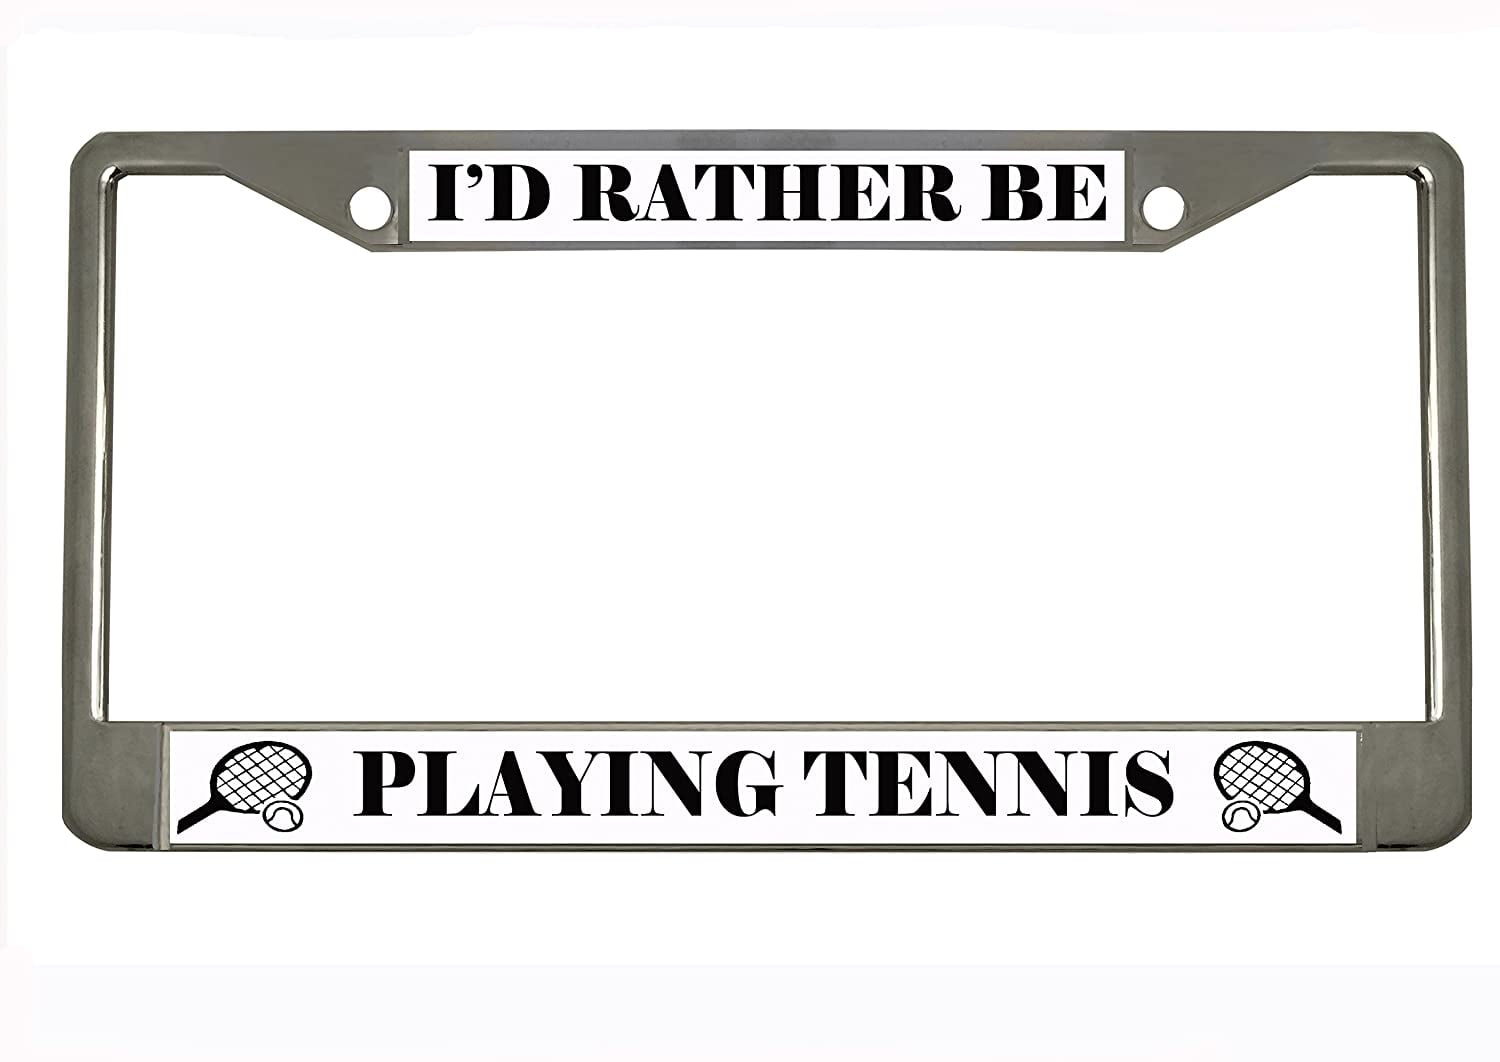 Id Rather Be Playing Tennis Chrome License Plate Frame